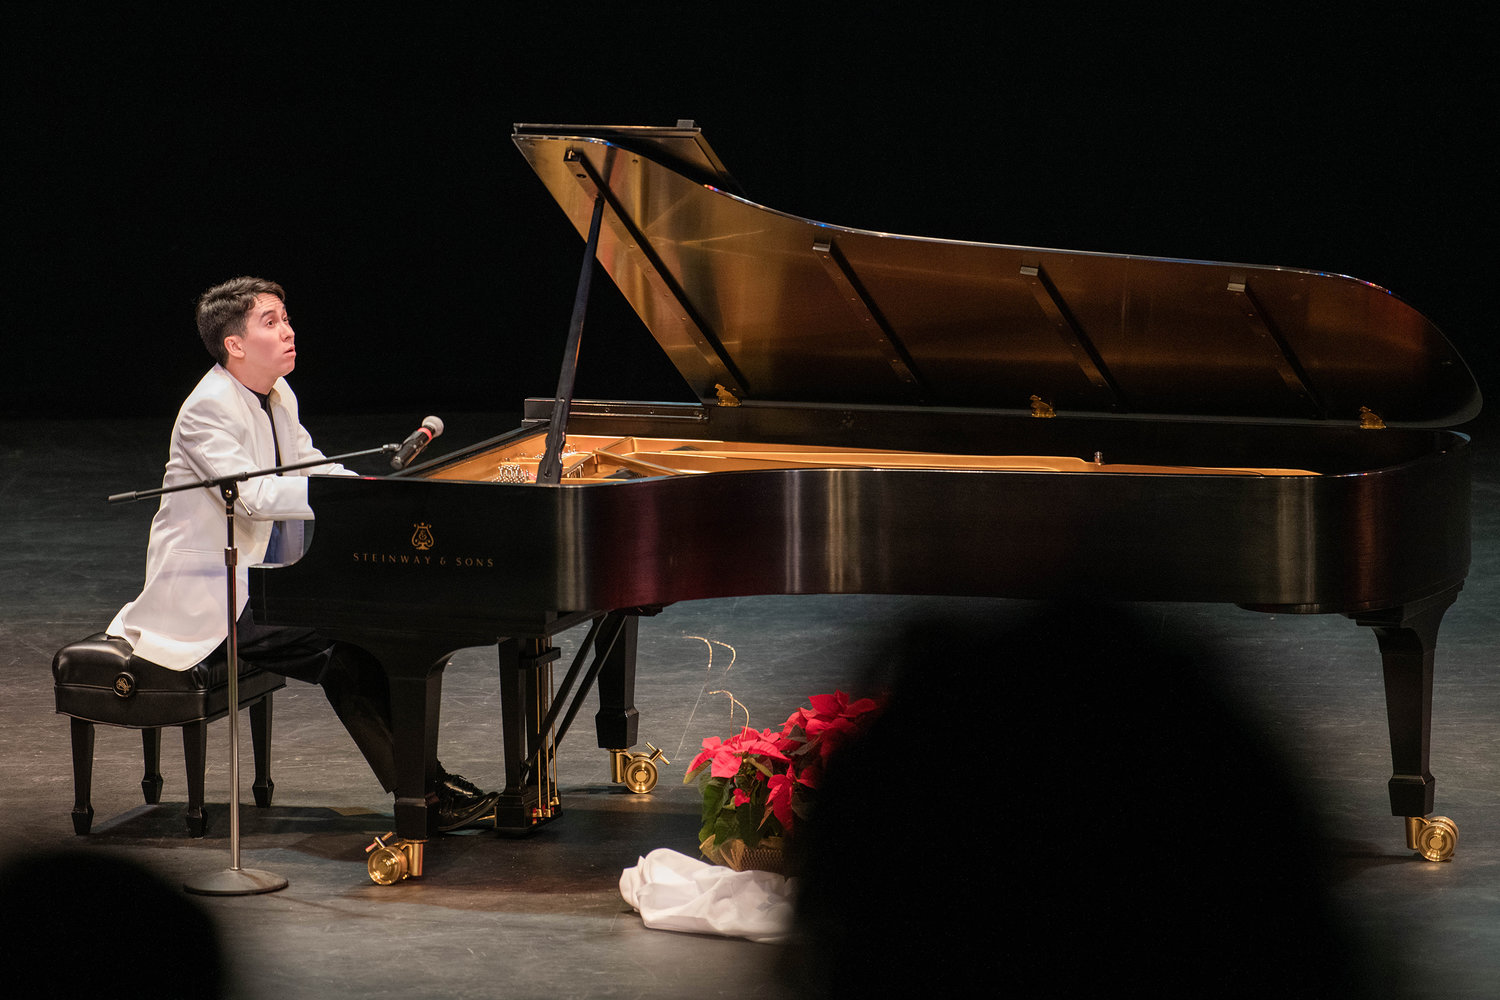 Charlie Albright performs for an audience on a nine-foot Steinway & Sons grand piano inside the Corbet Theatre Friday evening with proceeds going to the Charlie Albright Scholarship at Centralia College.